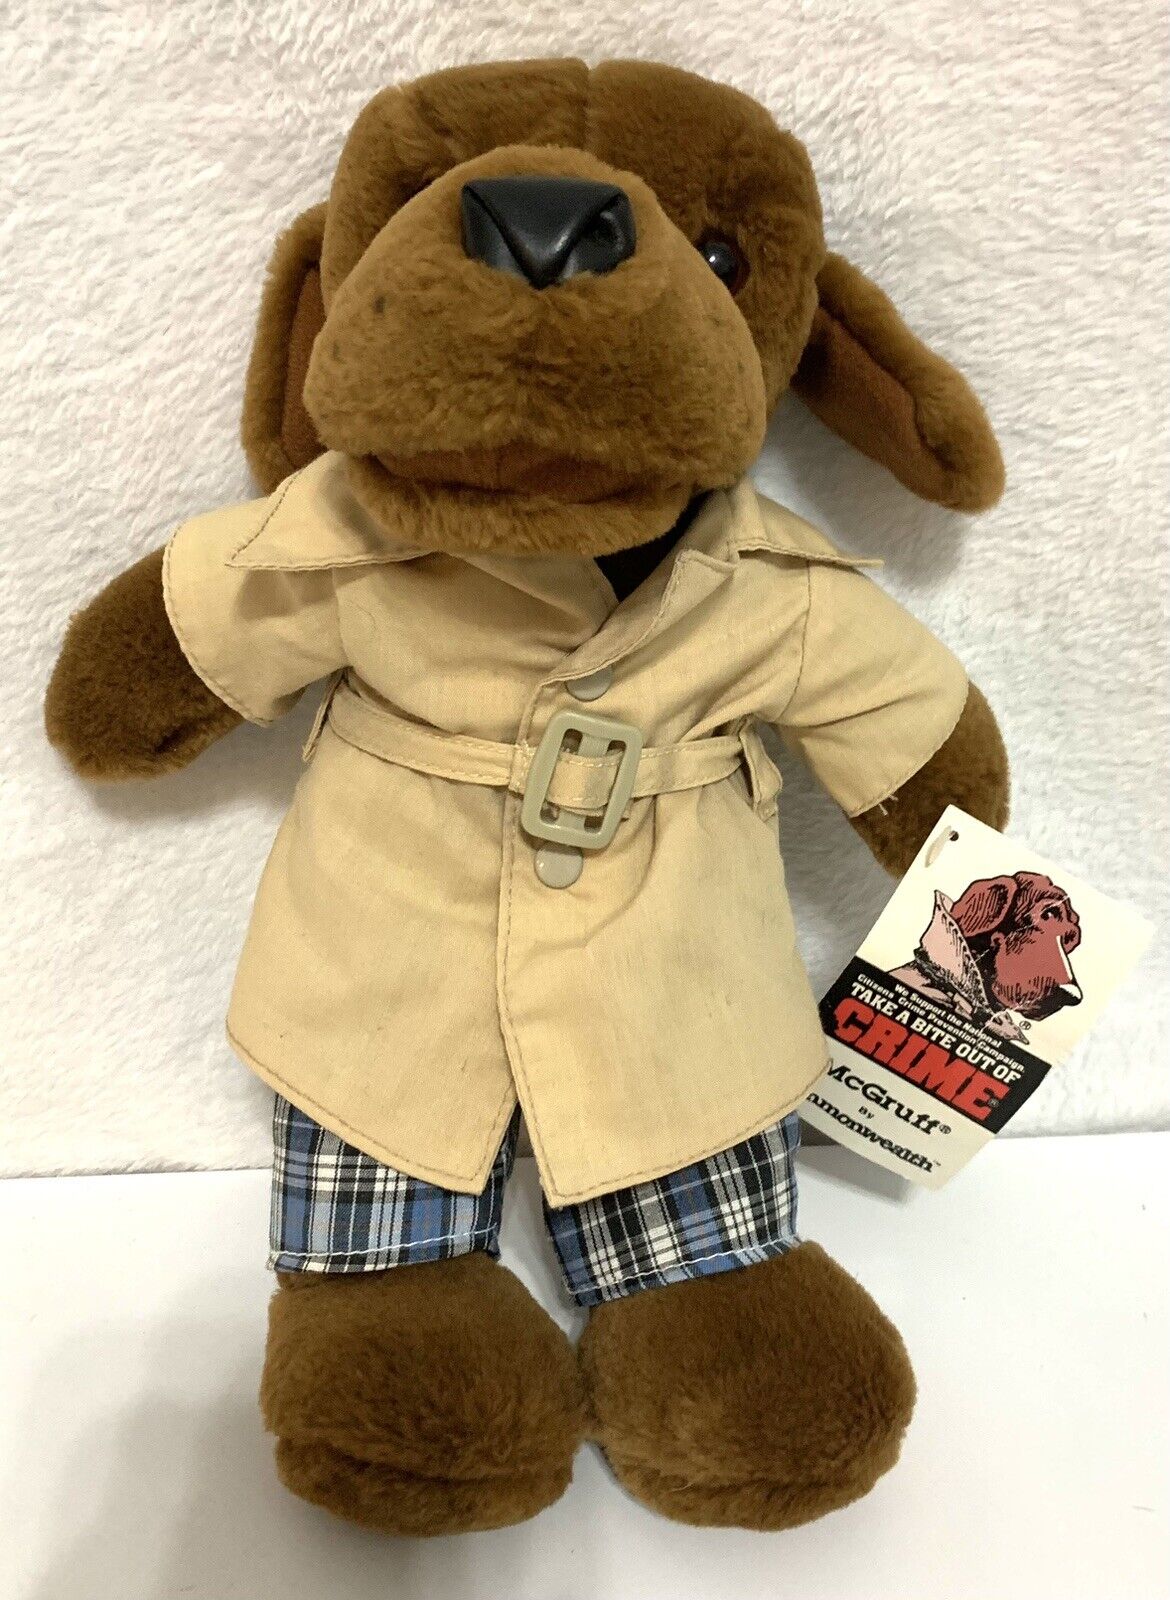 McGruff The Crime Dog Vintage Plush 11” Commonwealth Toy 1989 with NWT